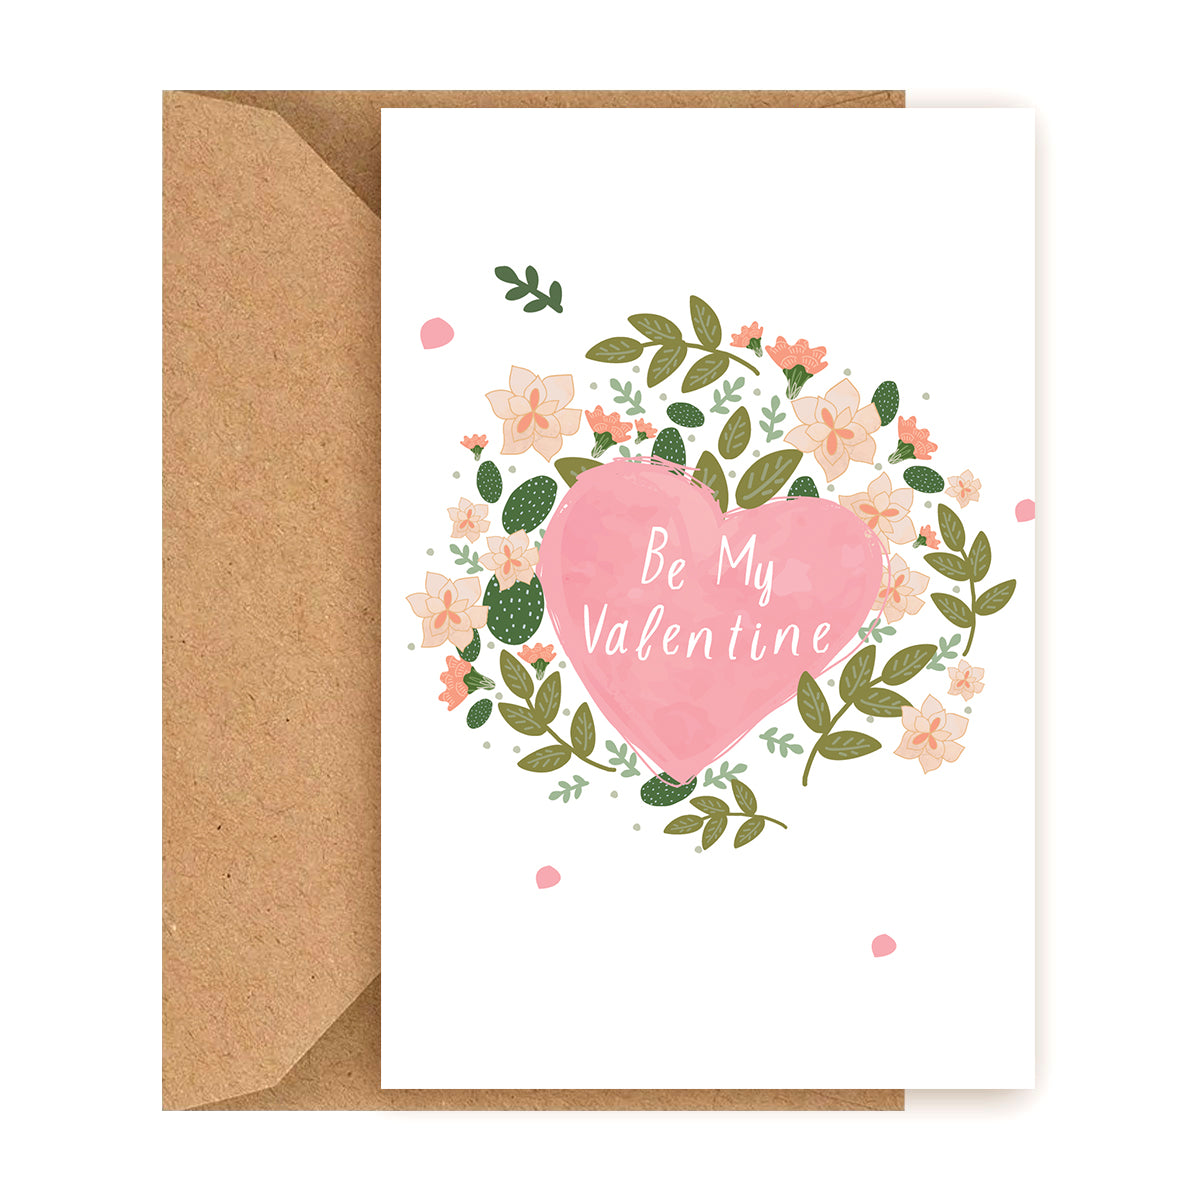 Valentine's Day Cards for Sale, Best Valentine Gifts 2023, Valentine Card Ideas, Valentine's Greeting Card, Unique DIY Valentine's Day Gifts, Valentine's Day Cards Perfect for Your Sweetheart, Lovely Flower Themed Valentine's Day Card